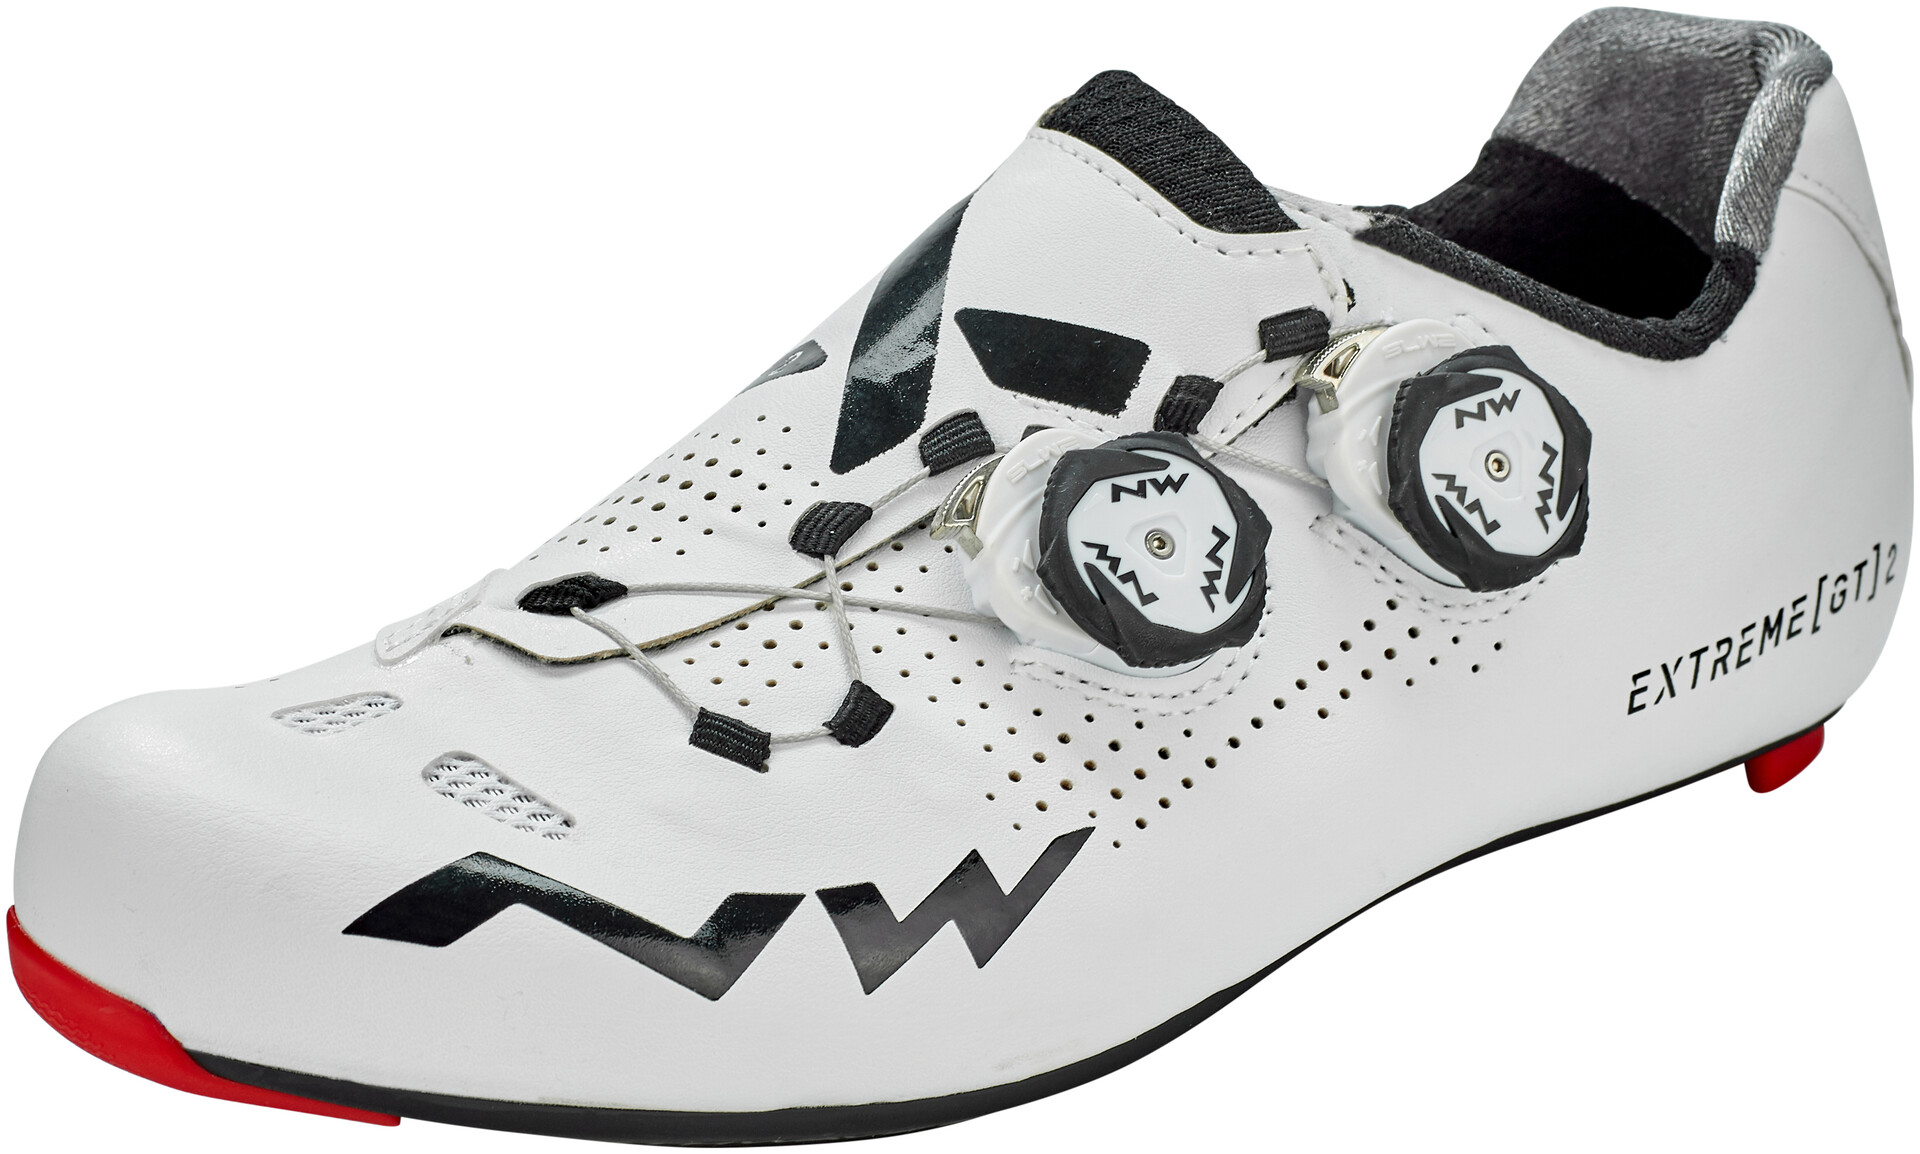 northwave extreme gt cycling shoes